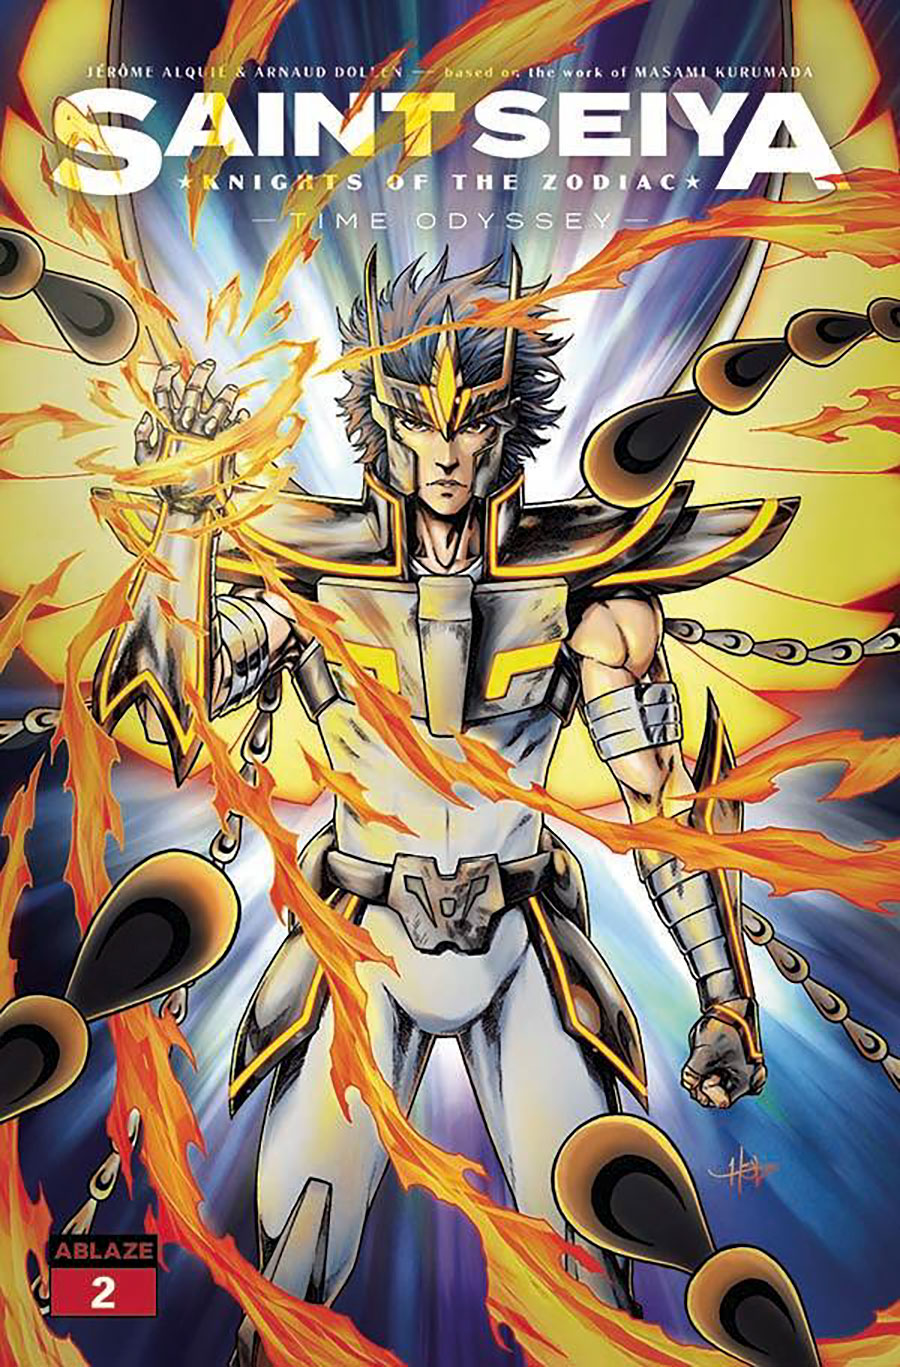 Saint Seiya Knights Of The Zodiac Time Odyssey #2 Cover B Variant Creees Lee Cover